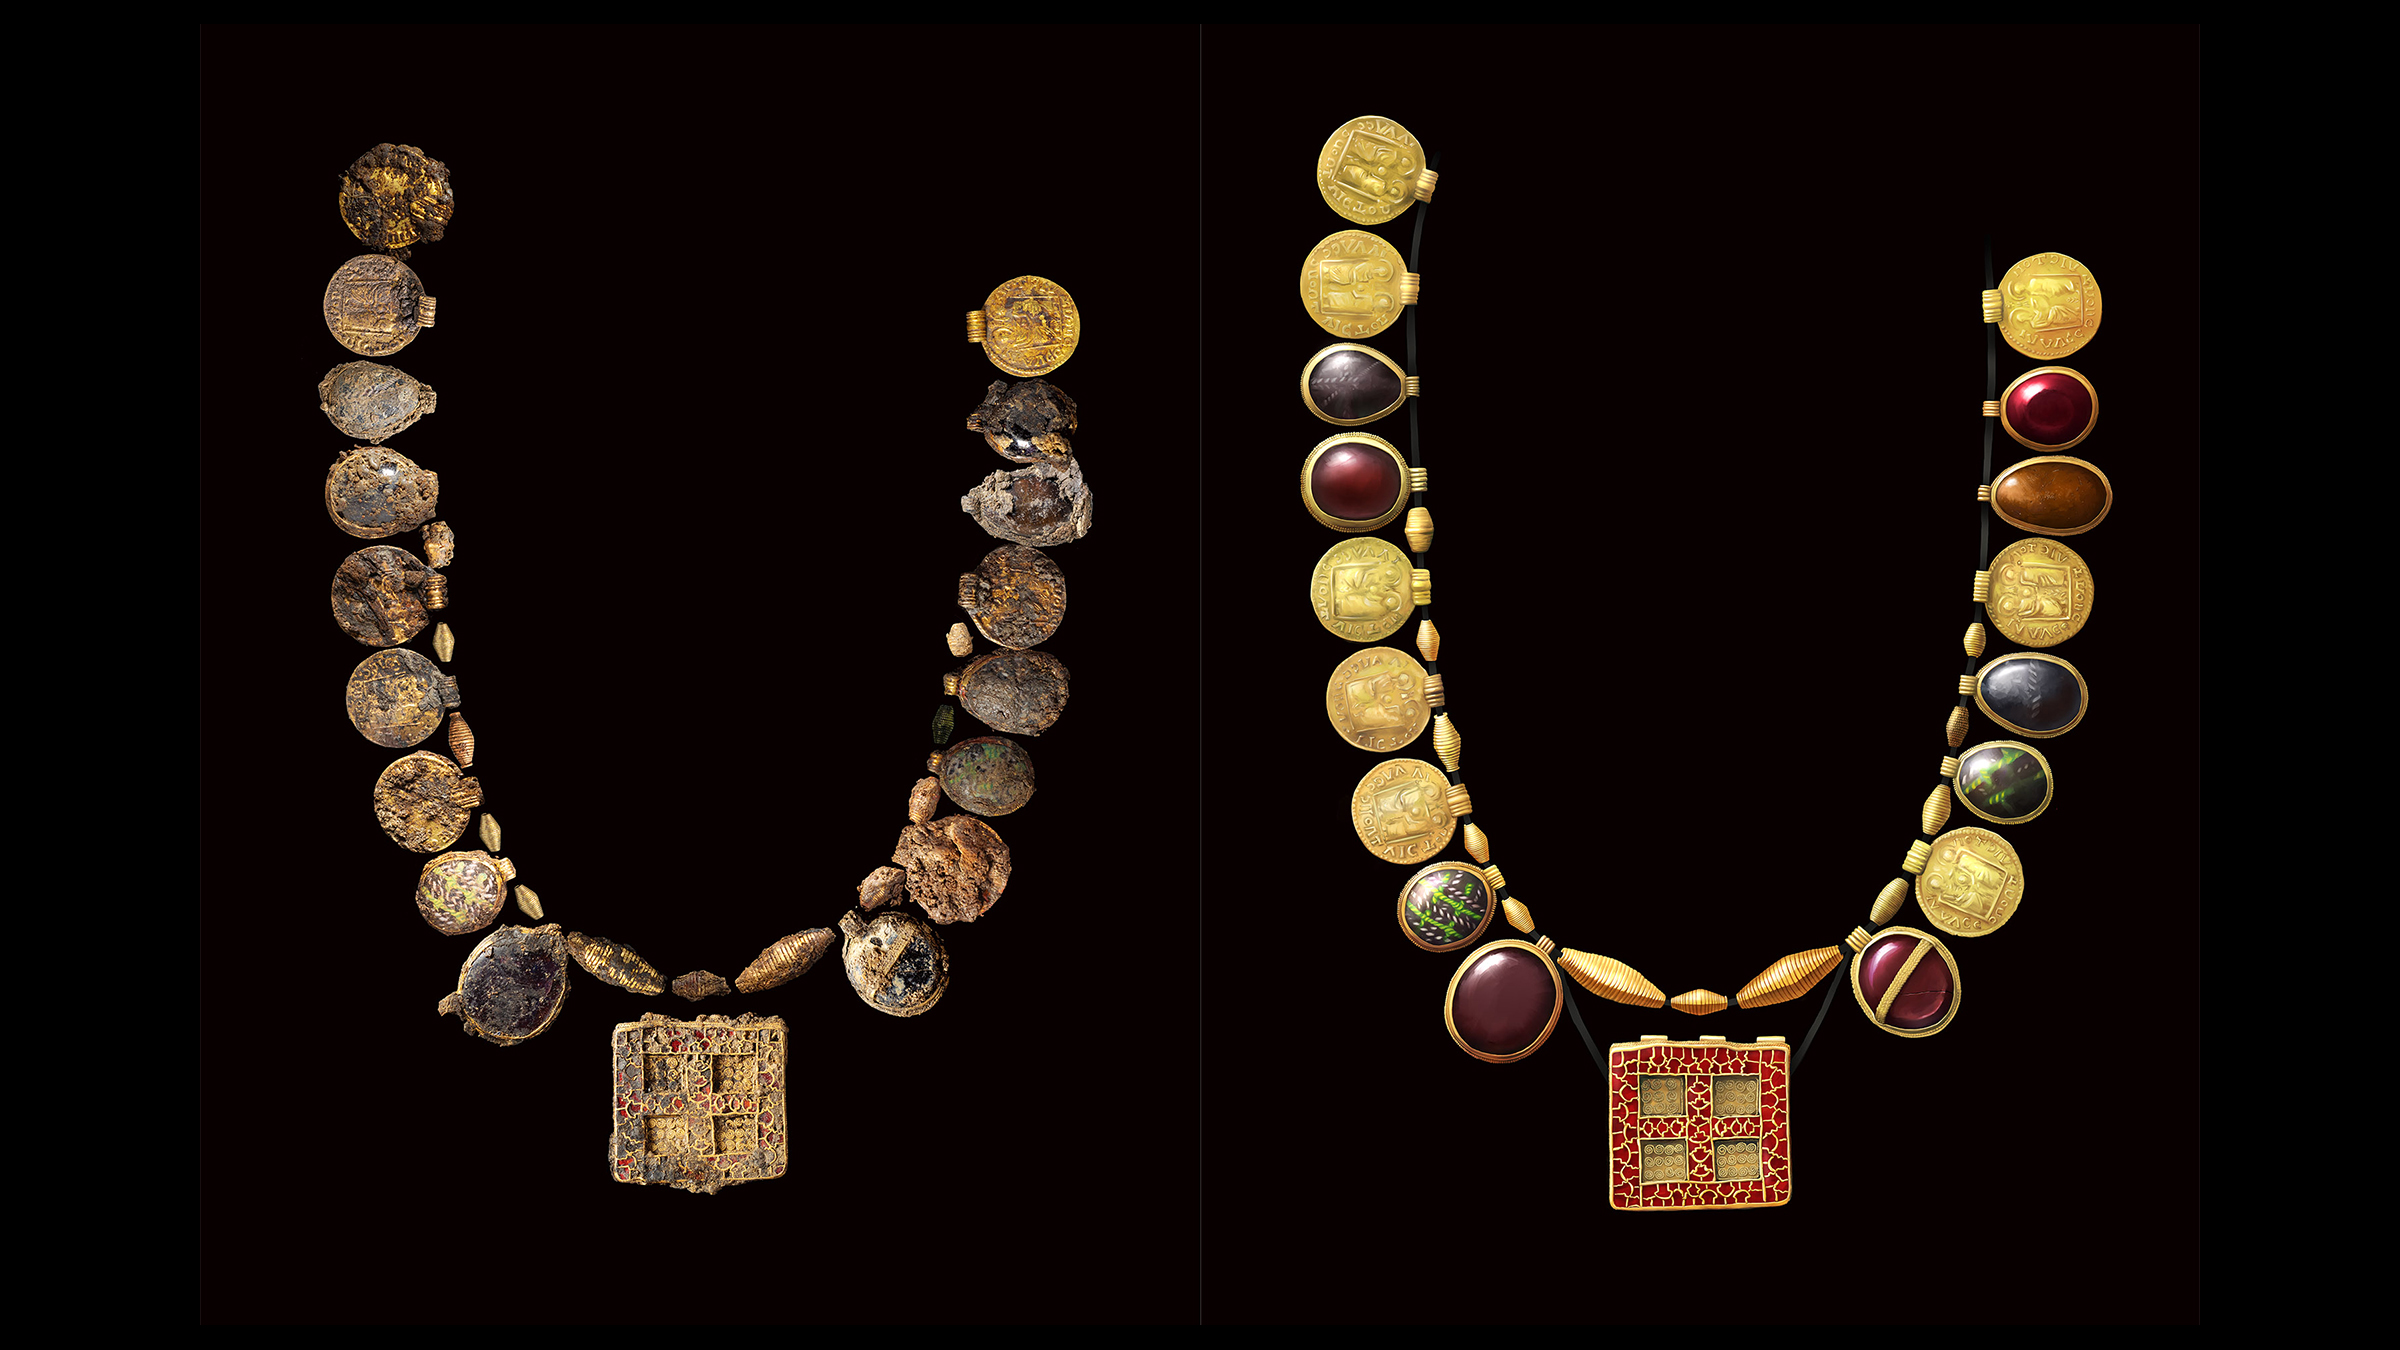 A photo of the reconstructed necklace (left) next to an illustration of it (right).